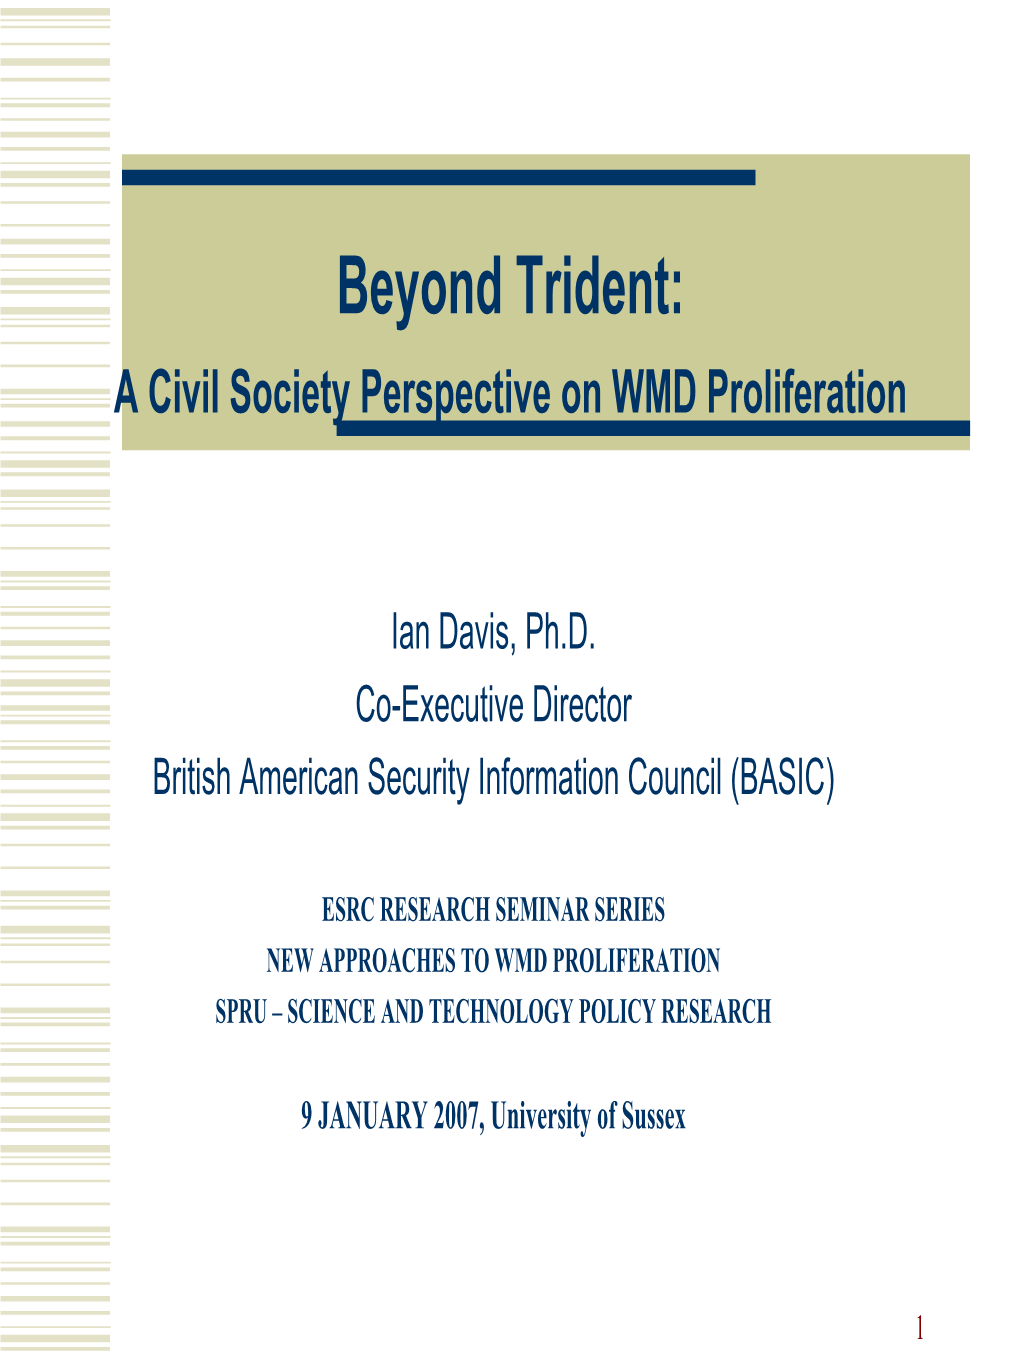 Beyond Trident: a Civil Society Perspective on WMD Proliferation